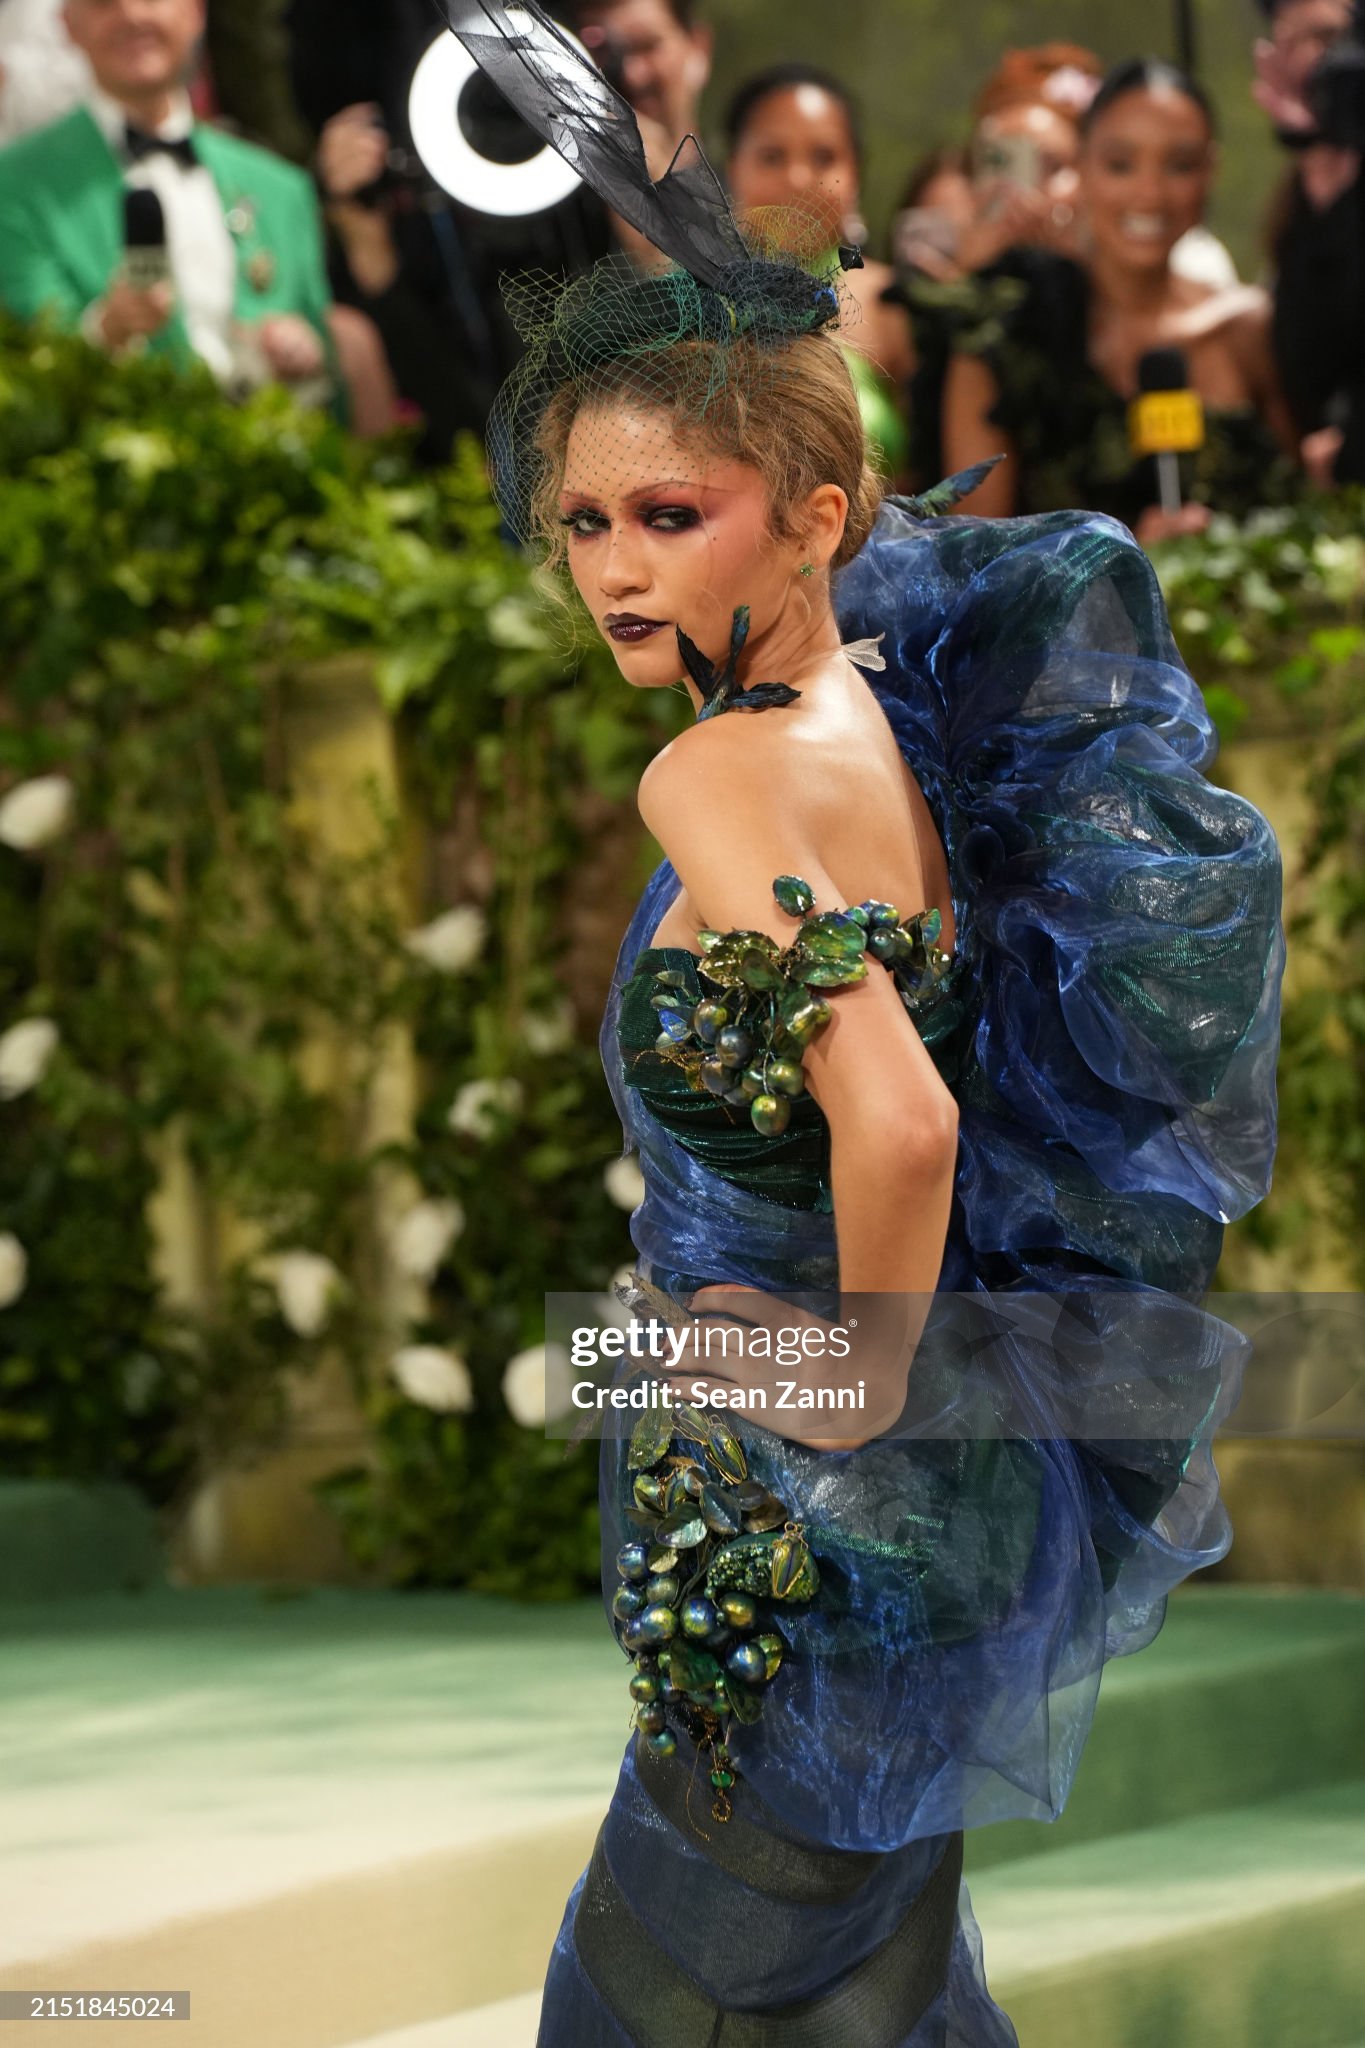 gettyimages-2151845024-2048x2048.jpg